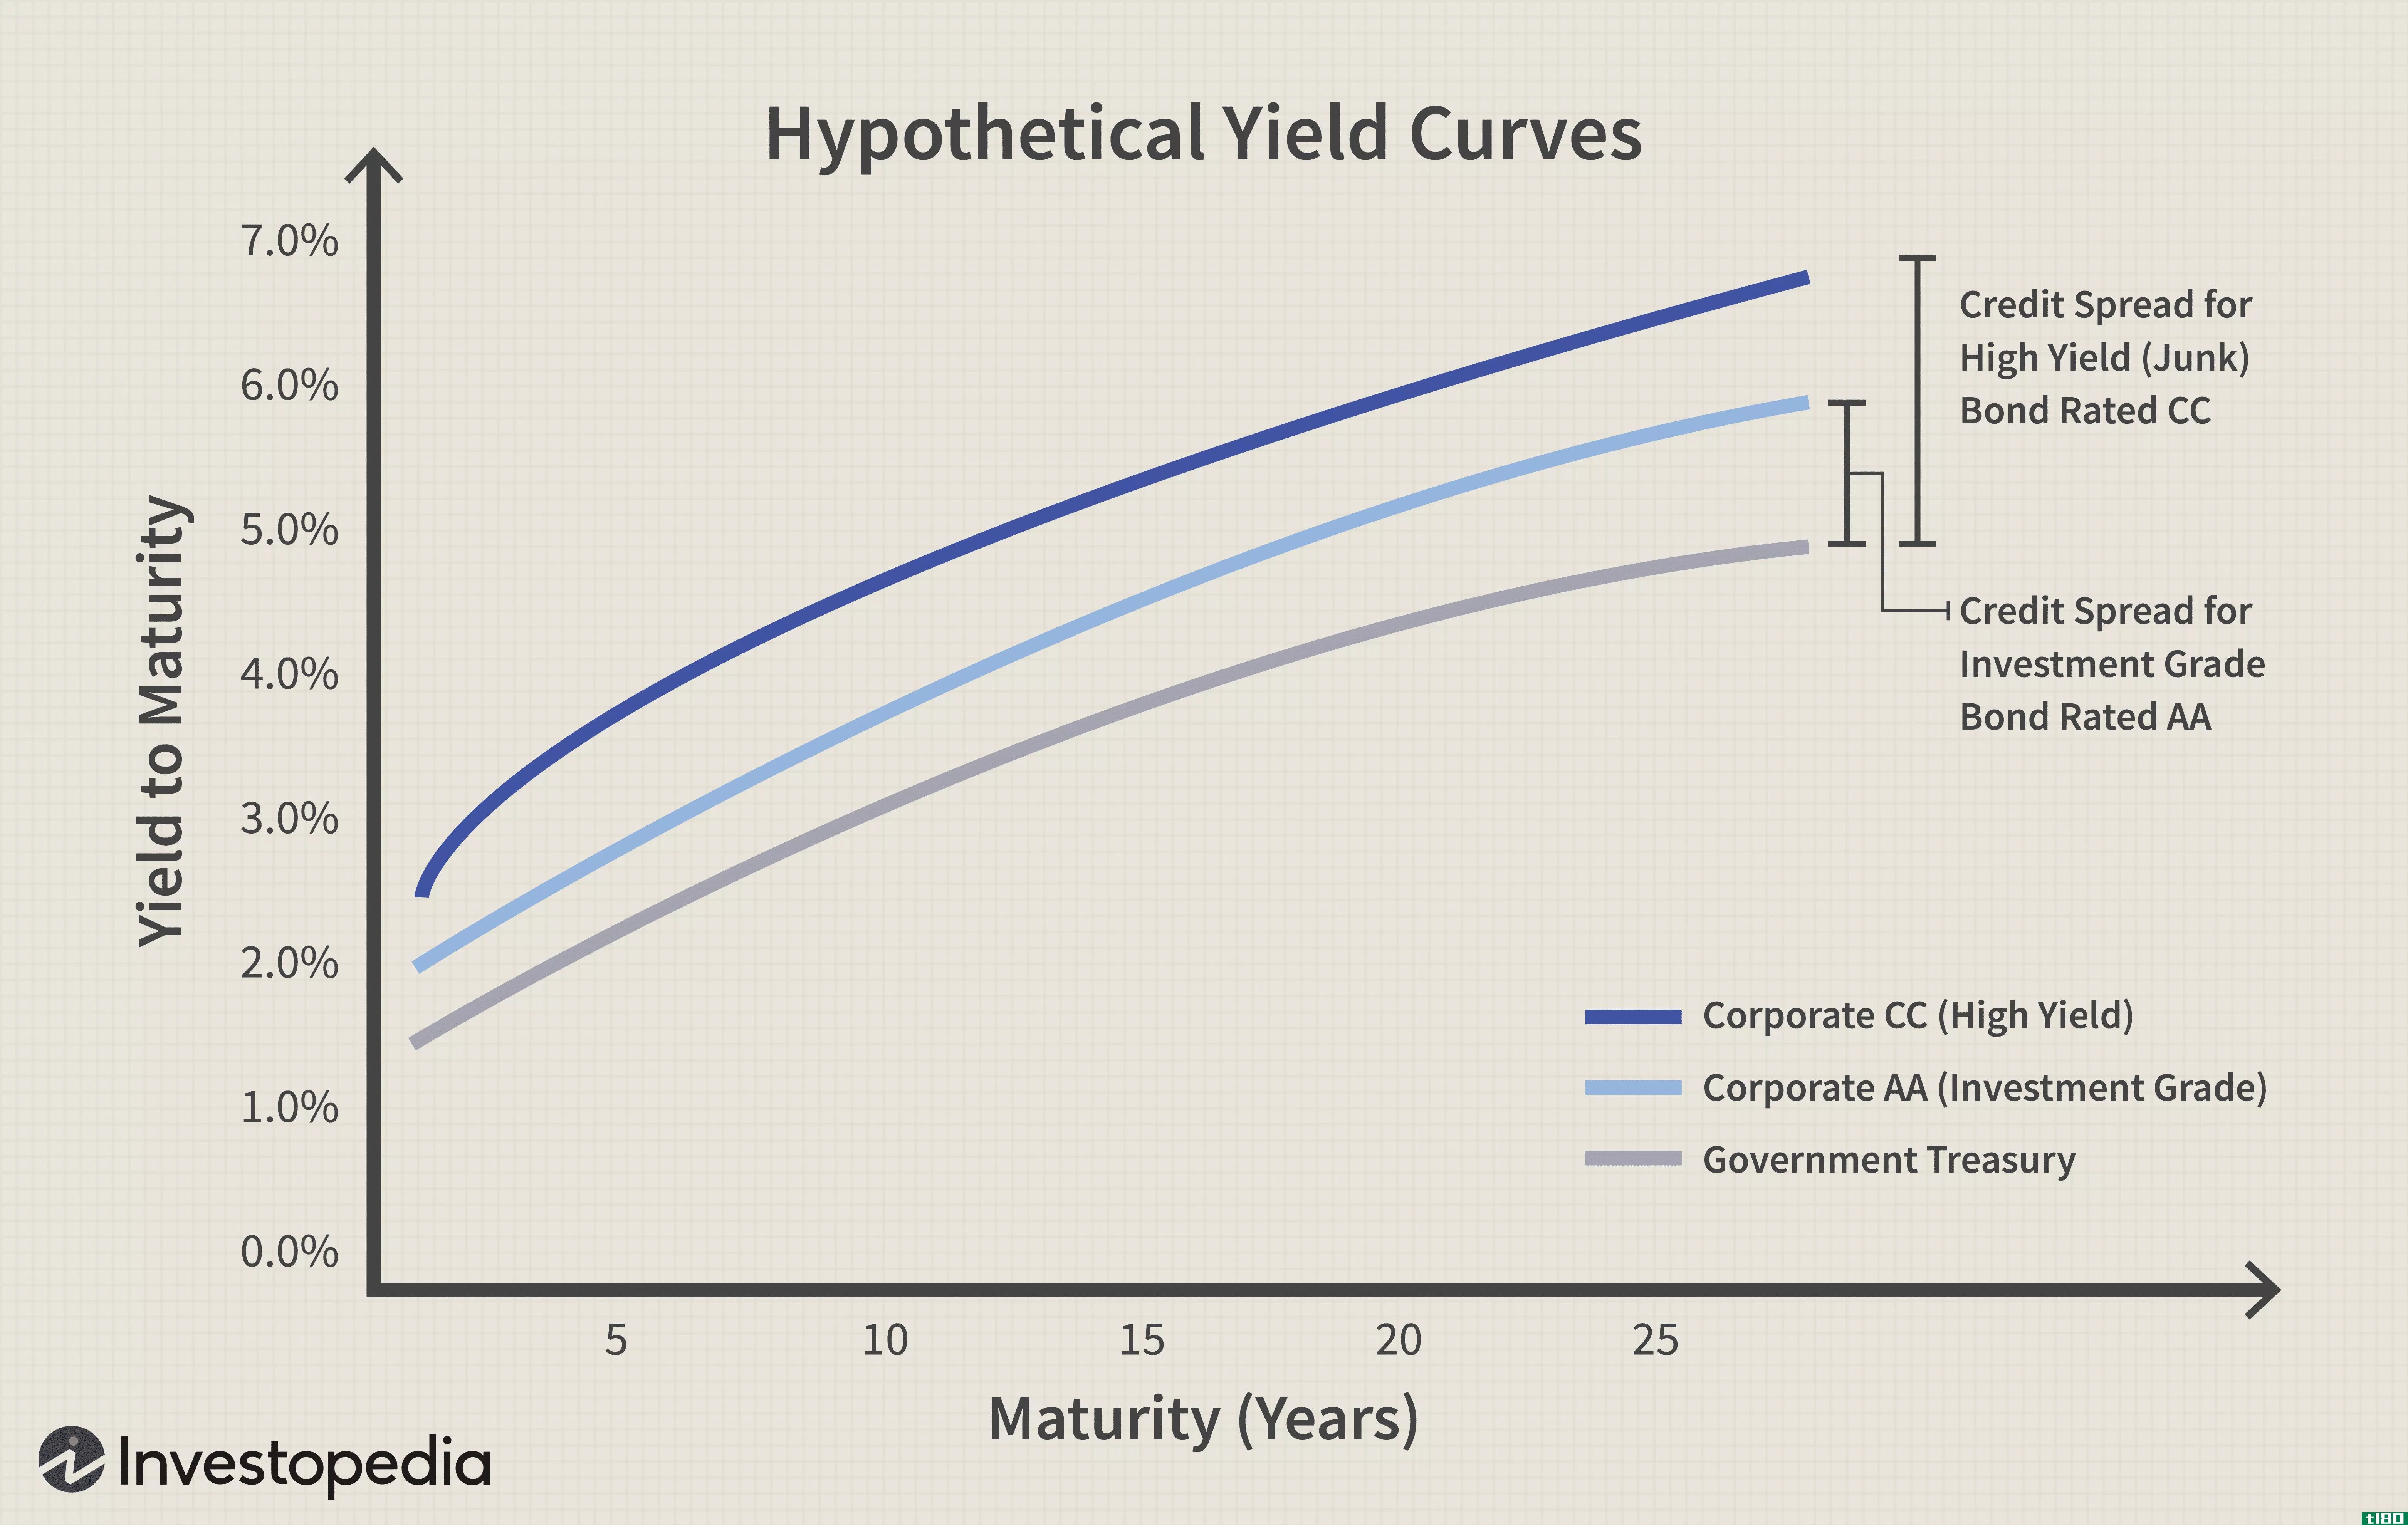 Hypothetical Yield Curves